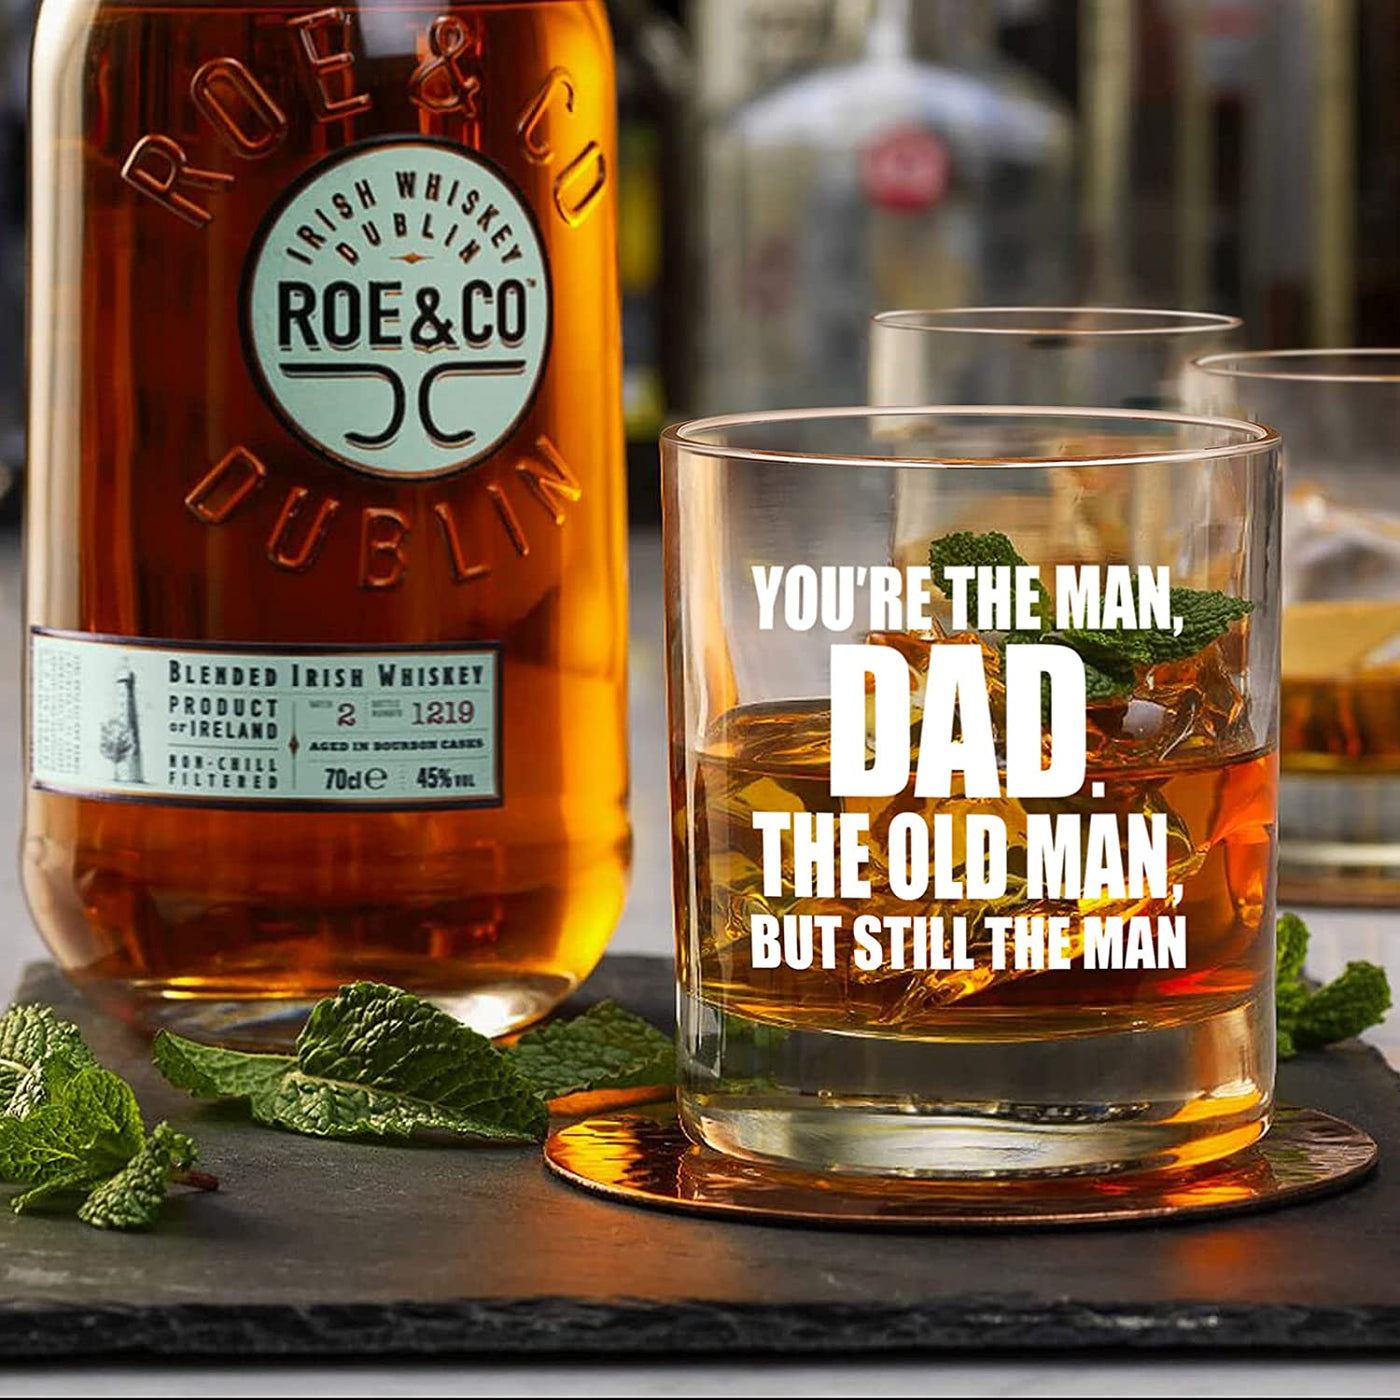 You're The Man, Dad Funny Whiskey Glasses Gift for Dad - Novelty Birthday, Fathers Day, Christmas Gift for Dad, Men, His, Unique Gift Idea for Him from Kids, Daughter, Son, Present for Dad, 11oz